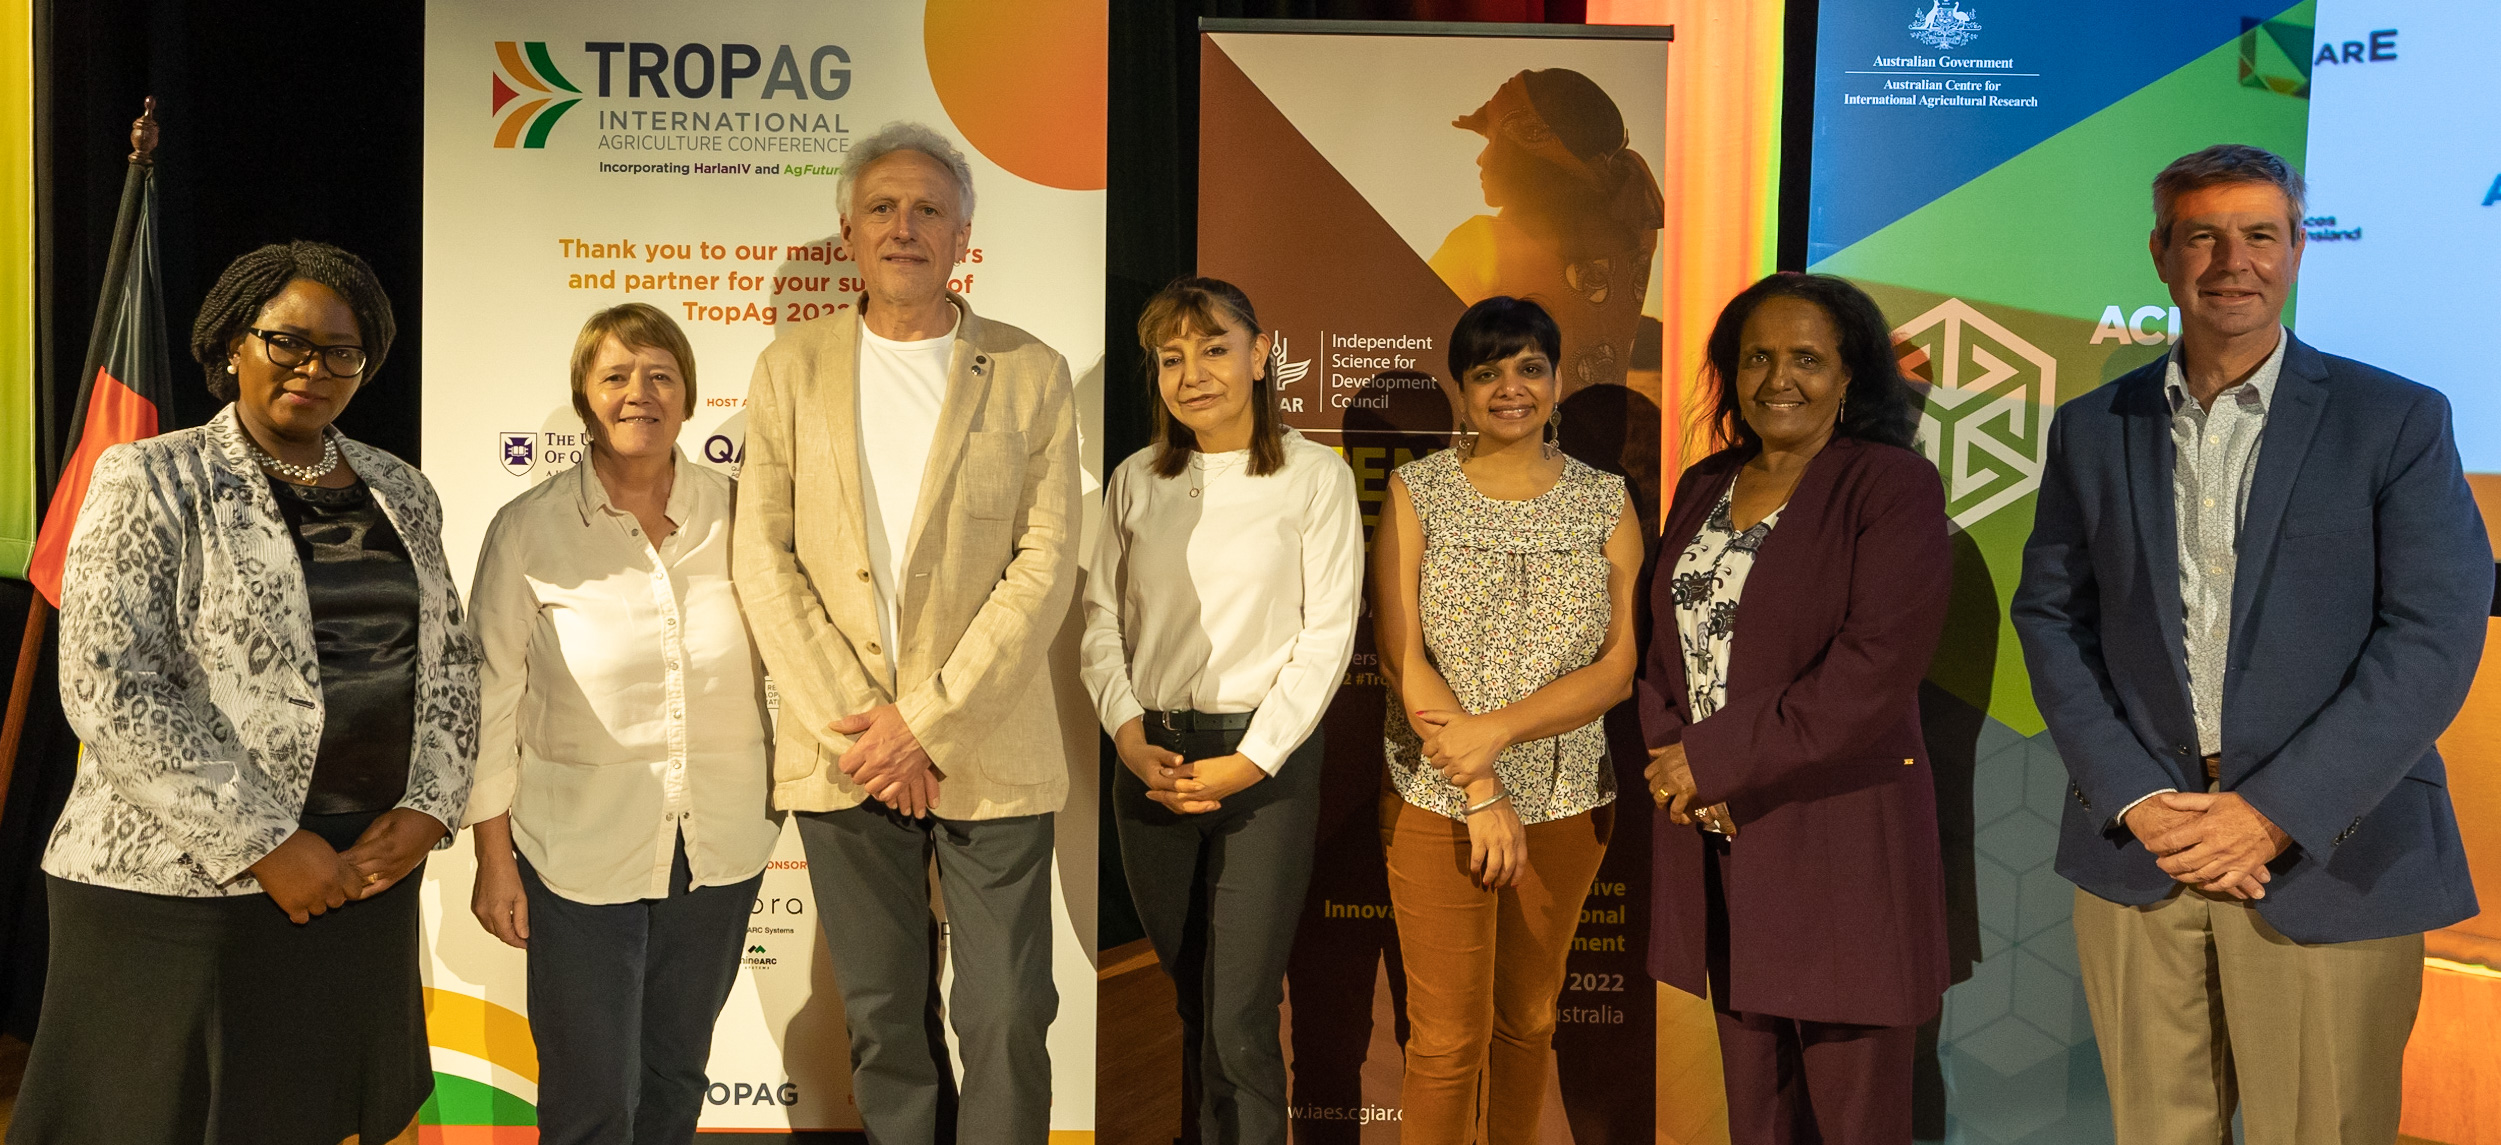 ISDC at TropAg Conference, Symposium on Building Inclusive Innovation in International Development, Brisbane, November 1, 2022